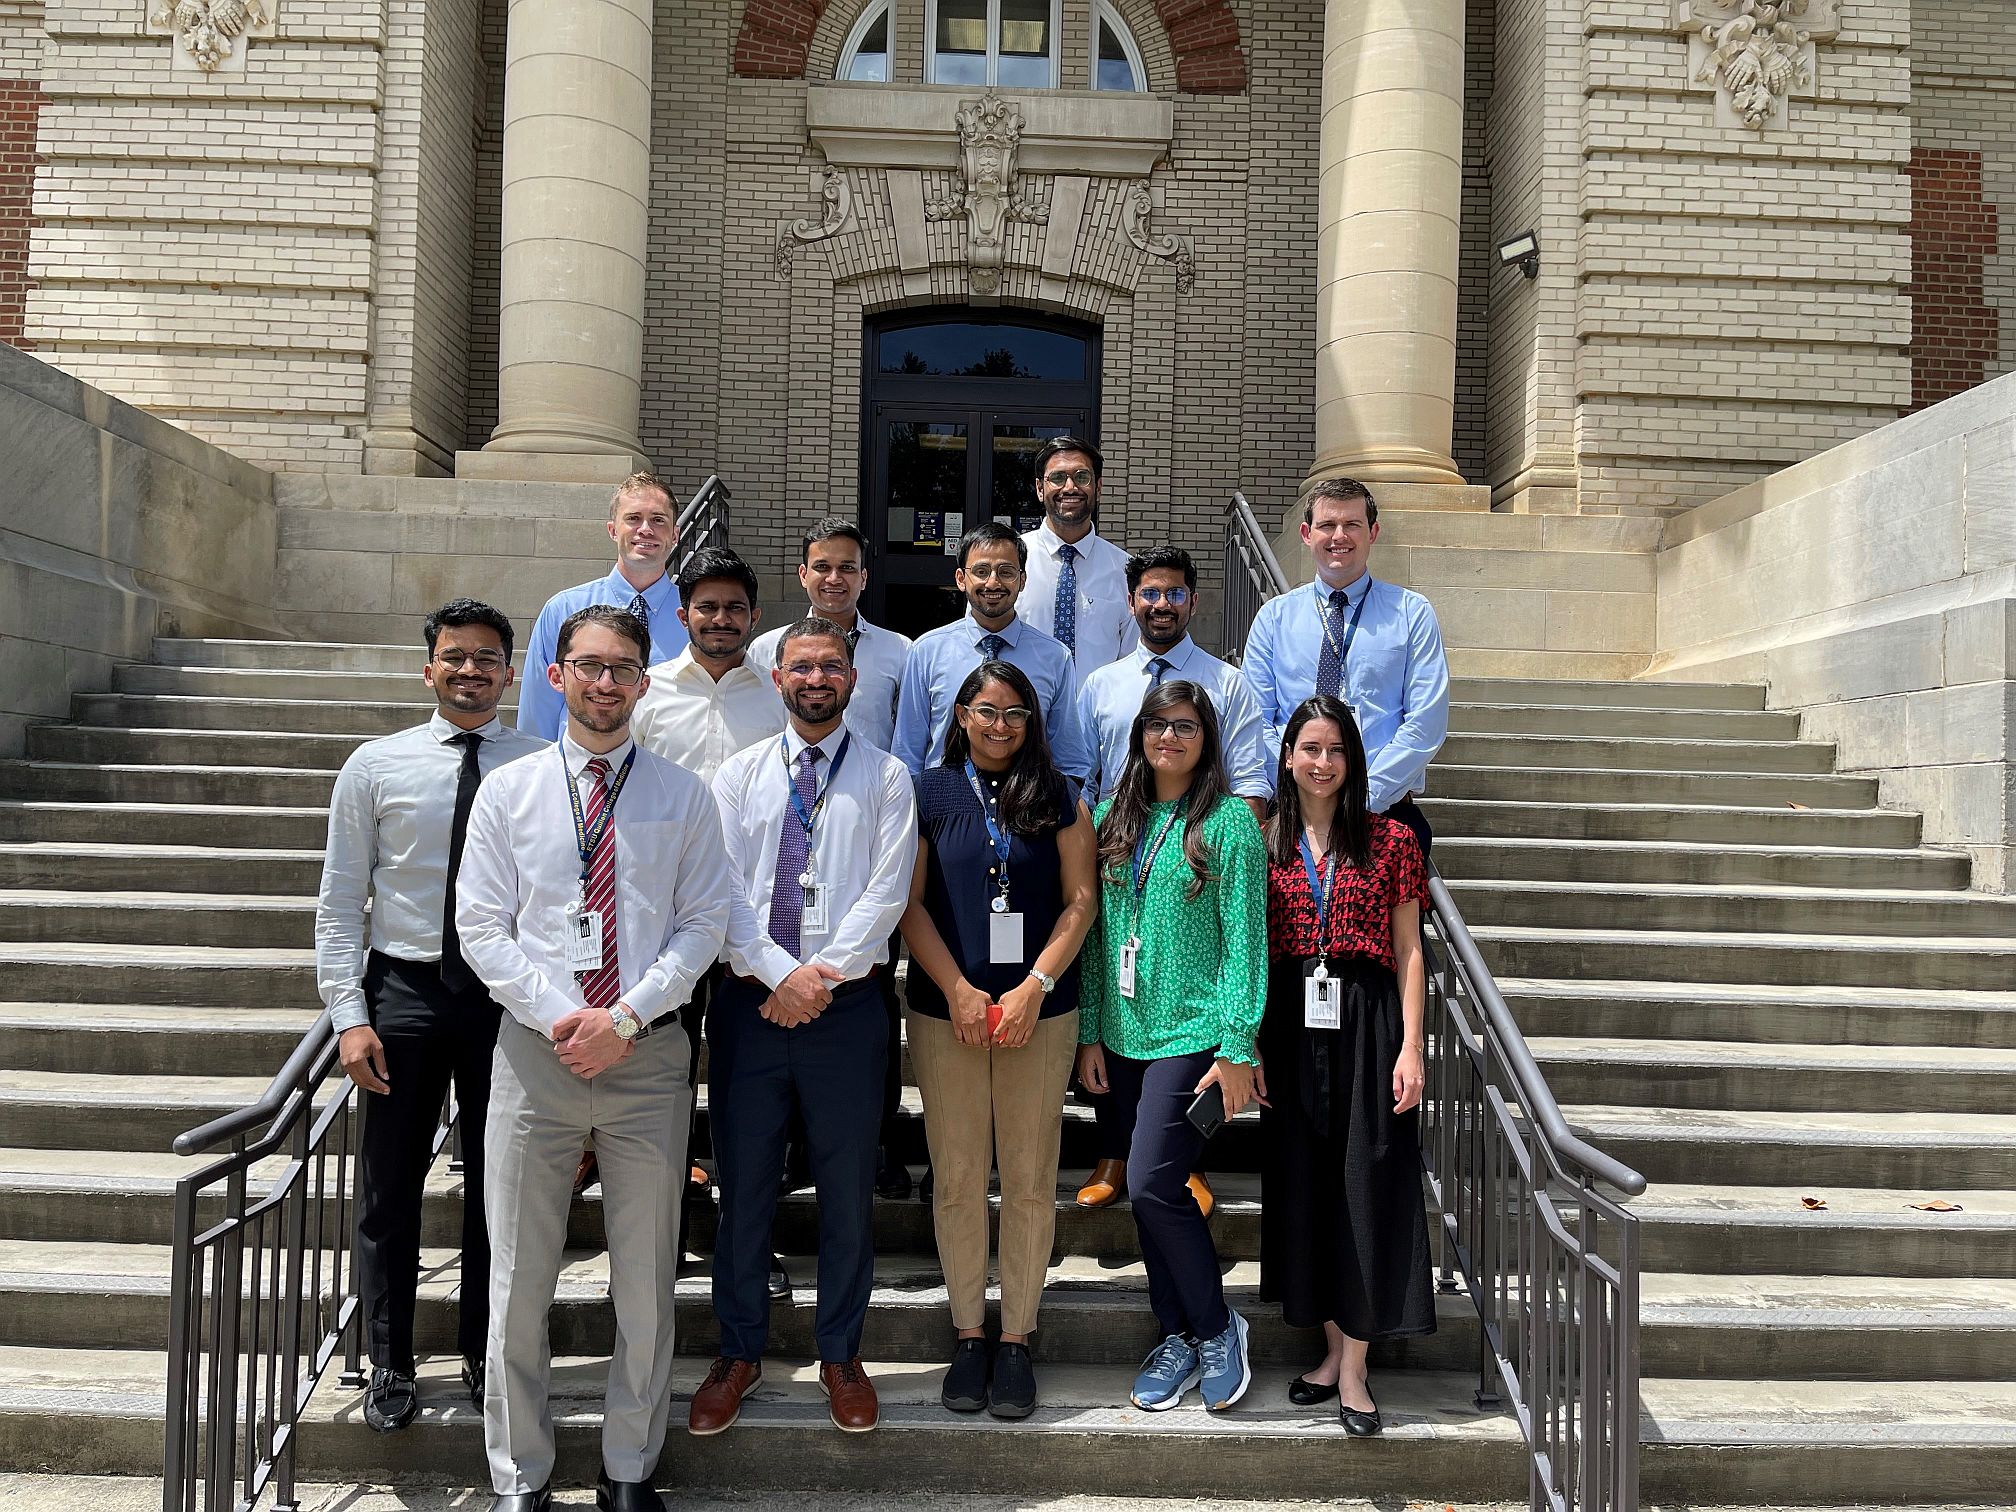 Group photo of third year residents standing on steps